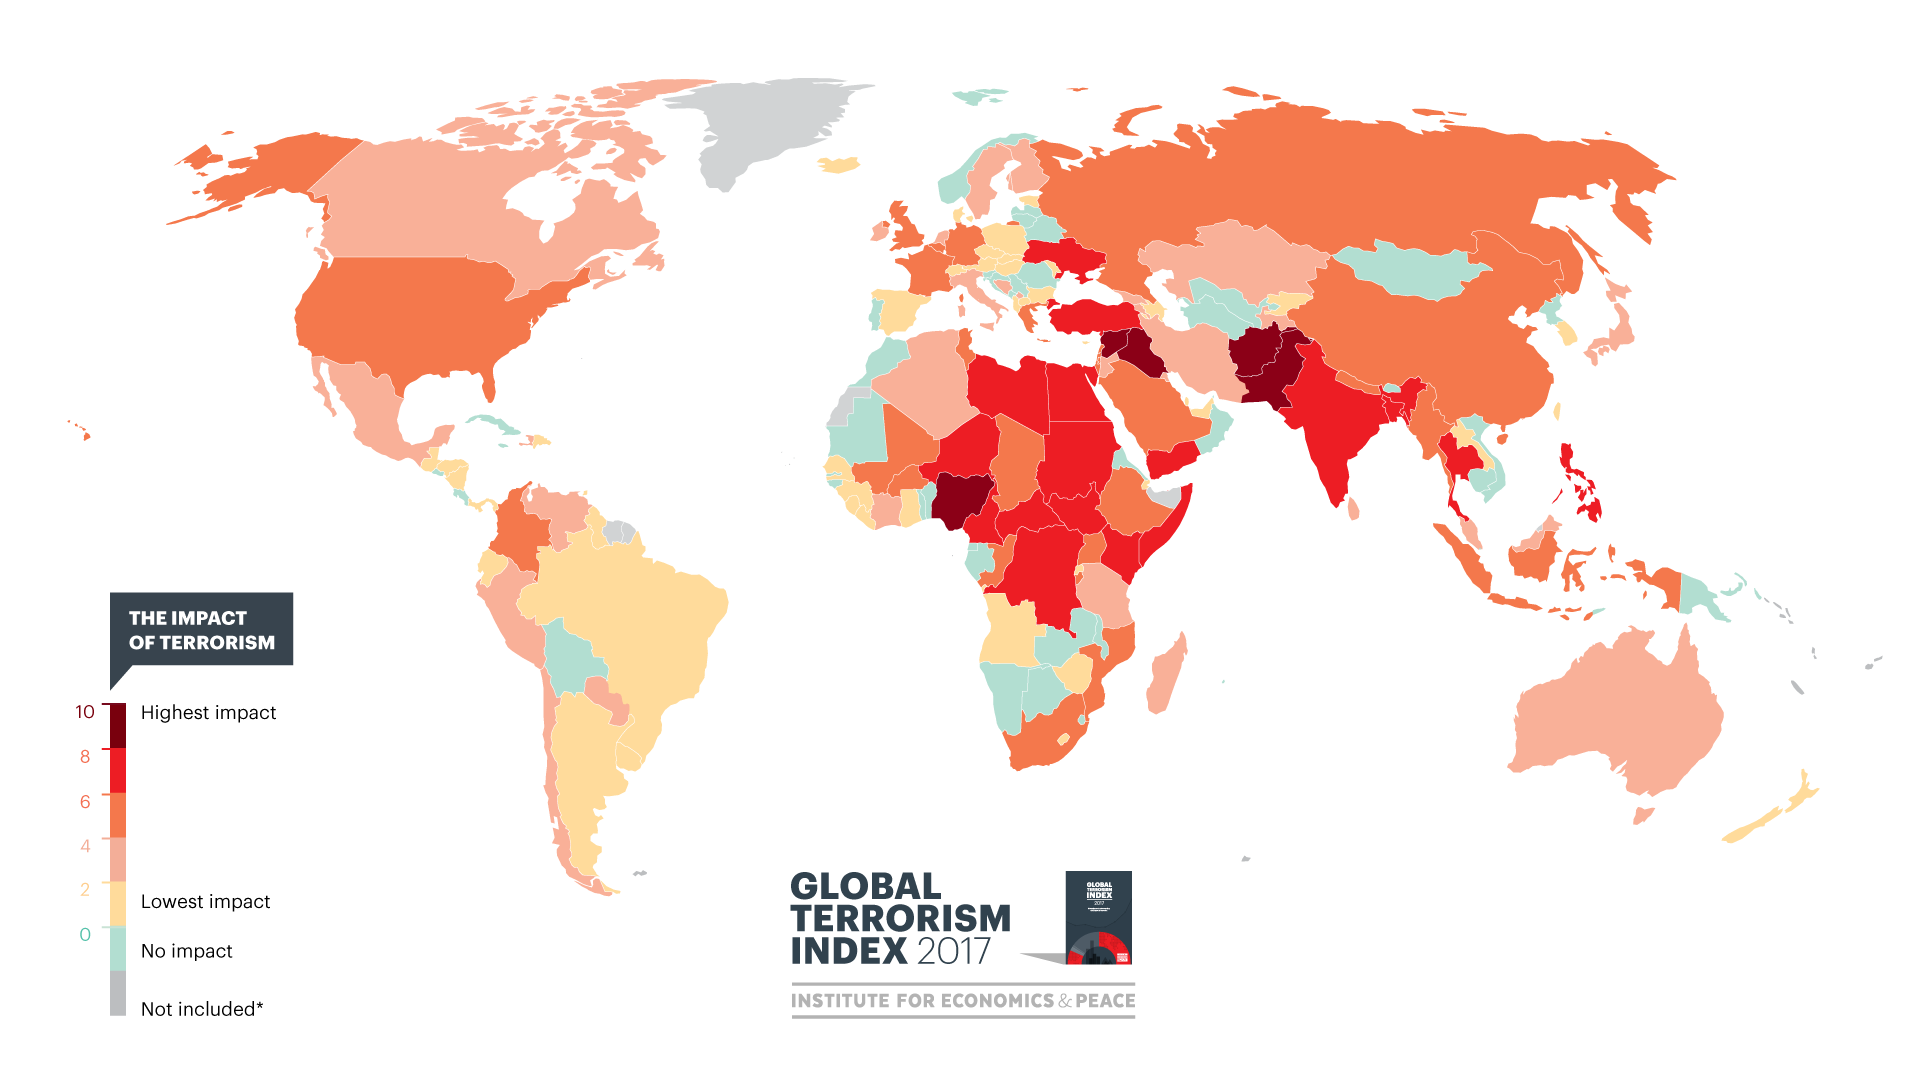 Launch of the Global Terrorism Index 2017